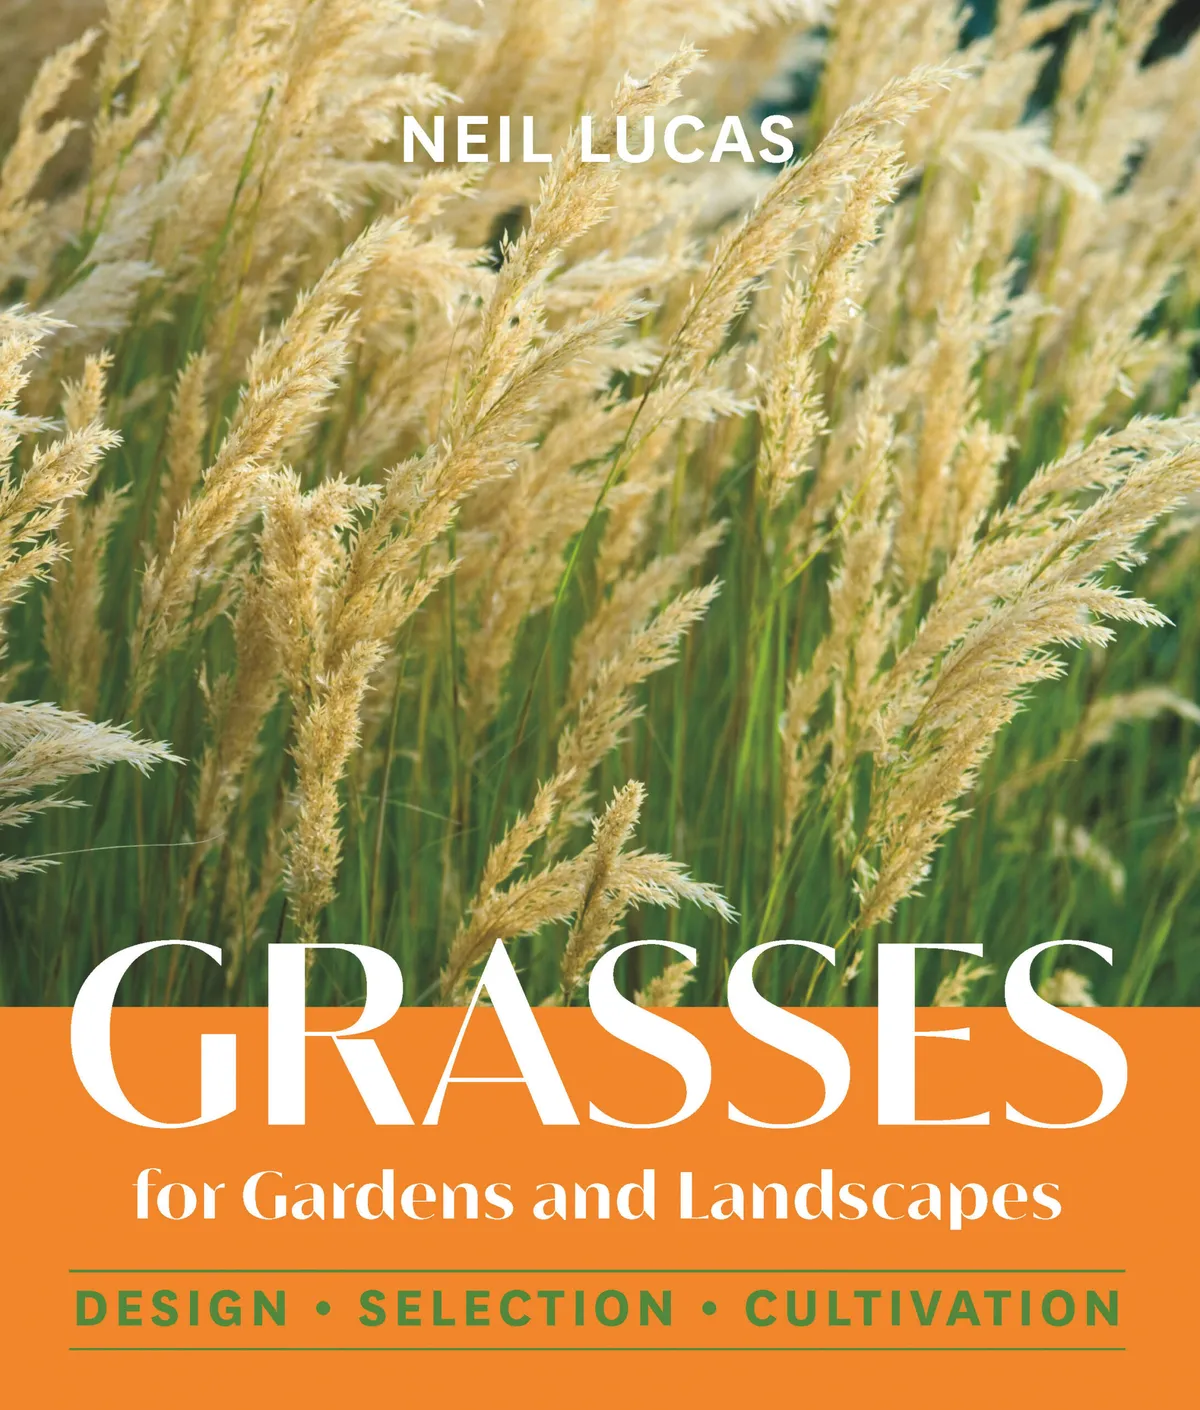 Gardens and Landscapes by Neil Lucas